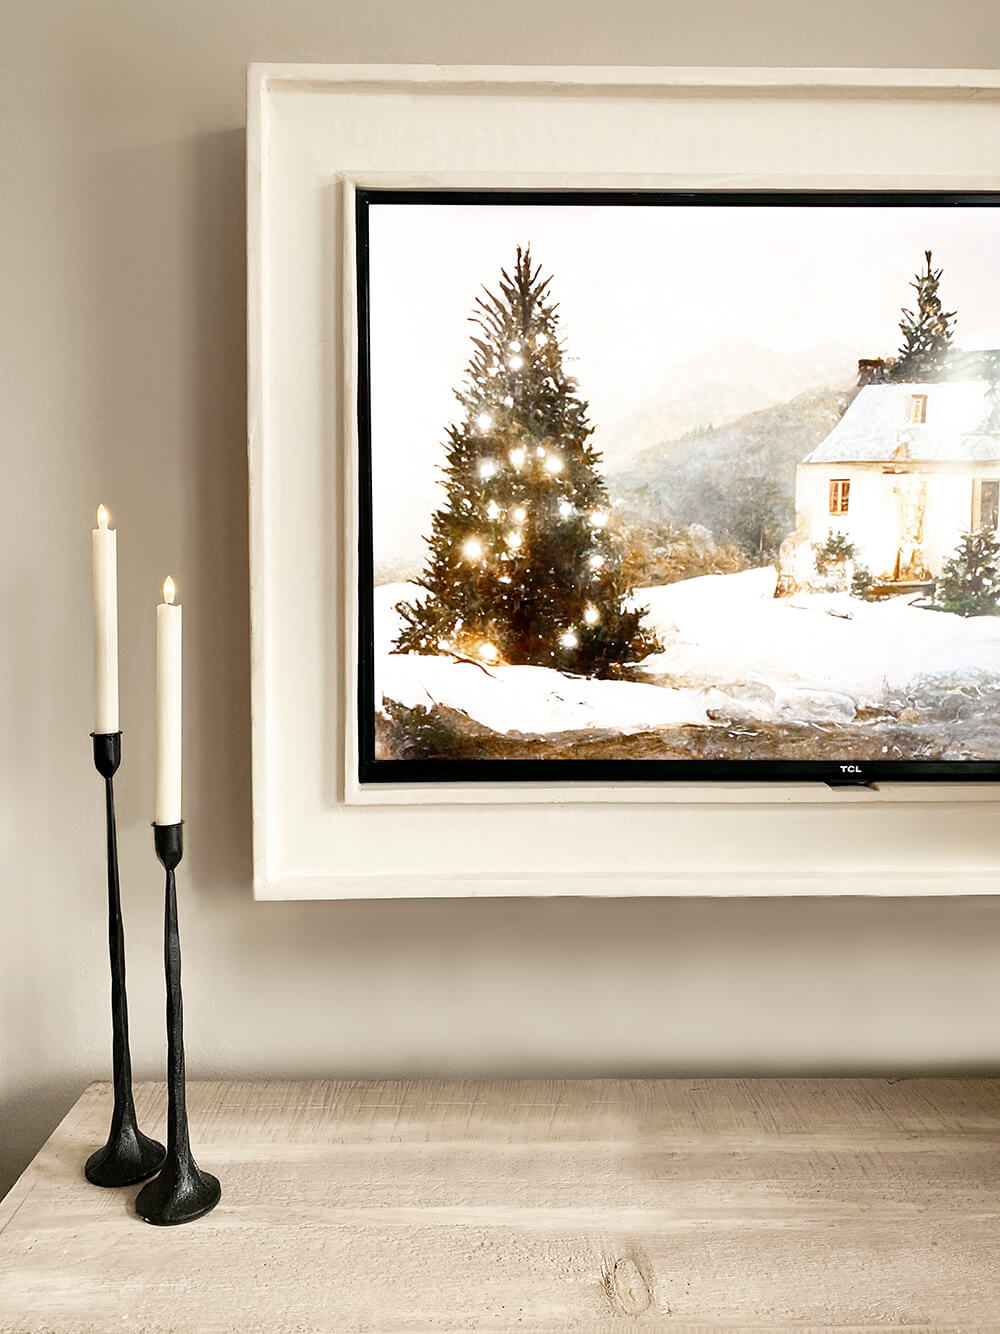 Creating a cozy ambiance with Christmas frame TV art is my favorite way to add some more holiday spirit to our home. I have gathered my favorite frame TV art for a simple and classic look for the holidays. Click to browse them over on KaraLayne.com now!